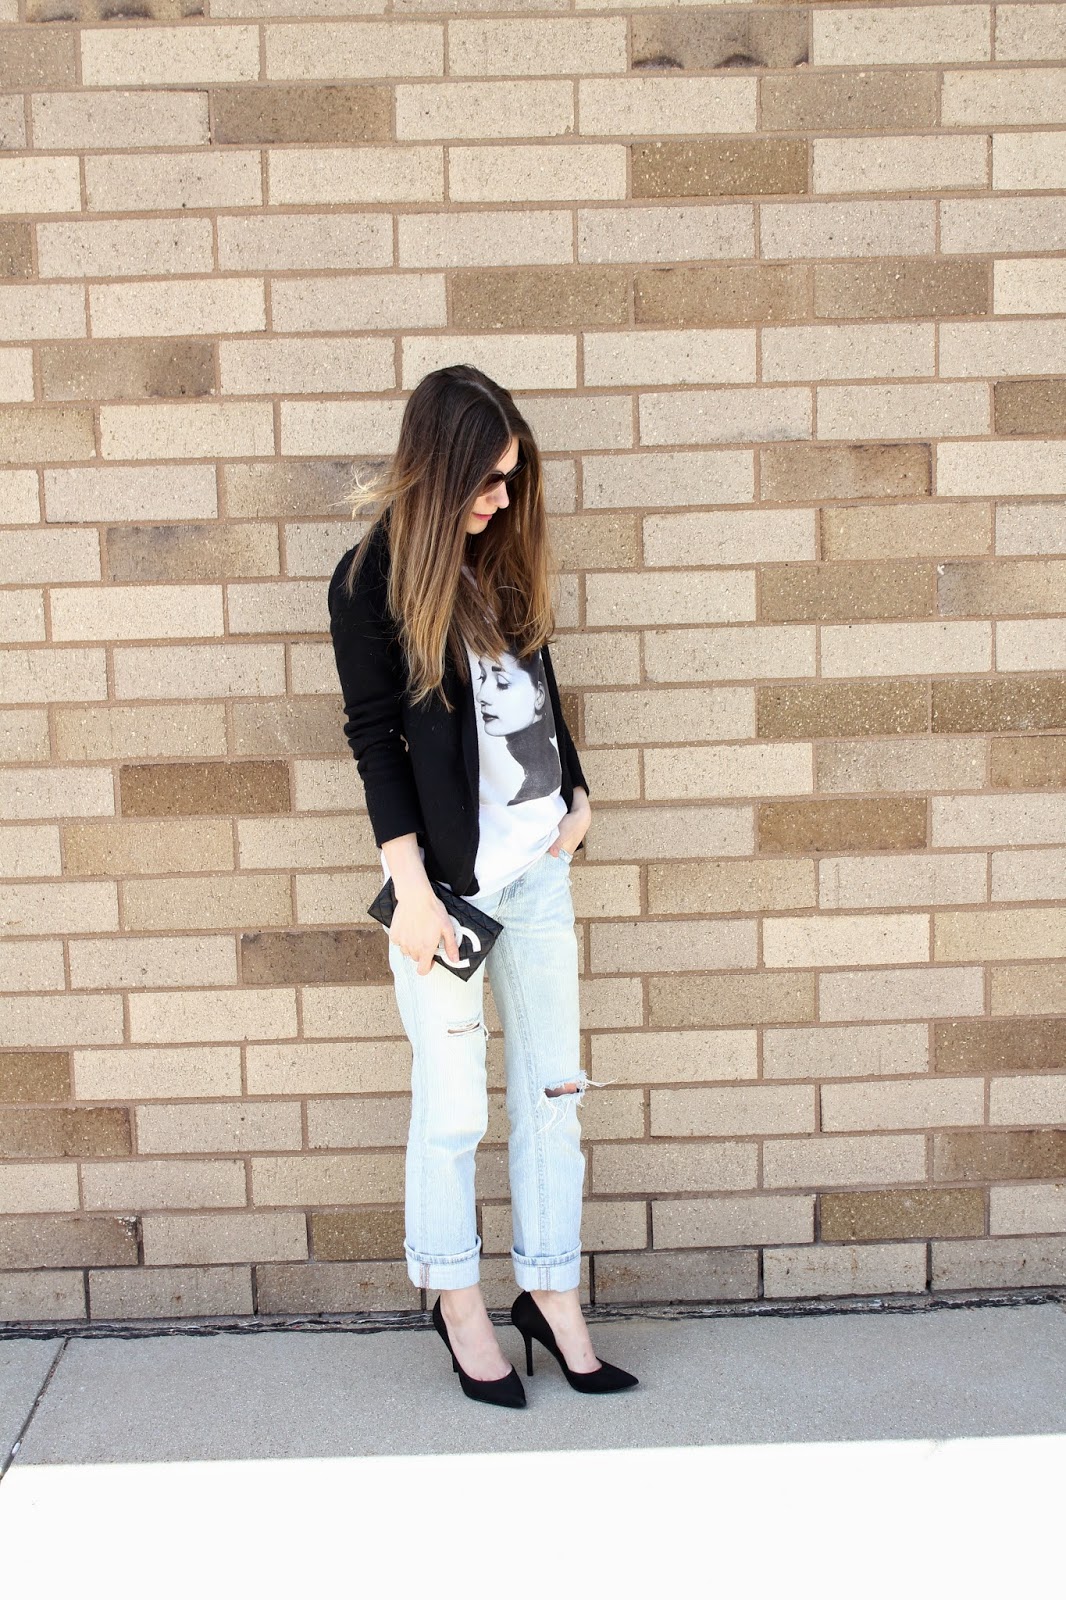 Outfit Of The Week: Distressed Boyfriend Jeans - The Dark Plum